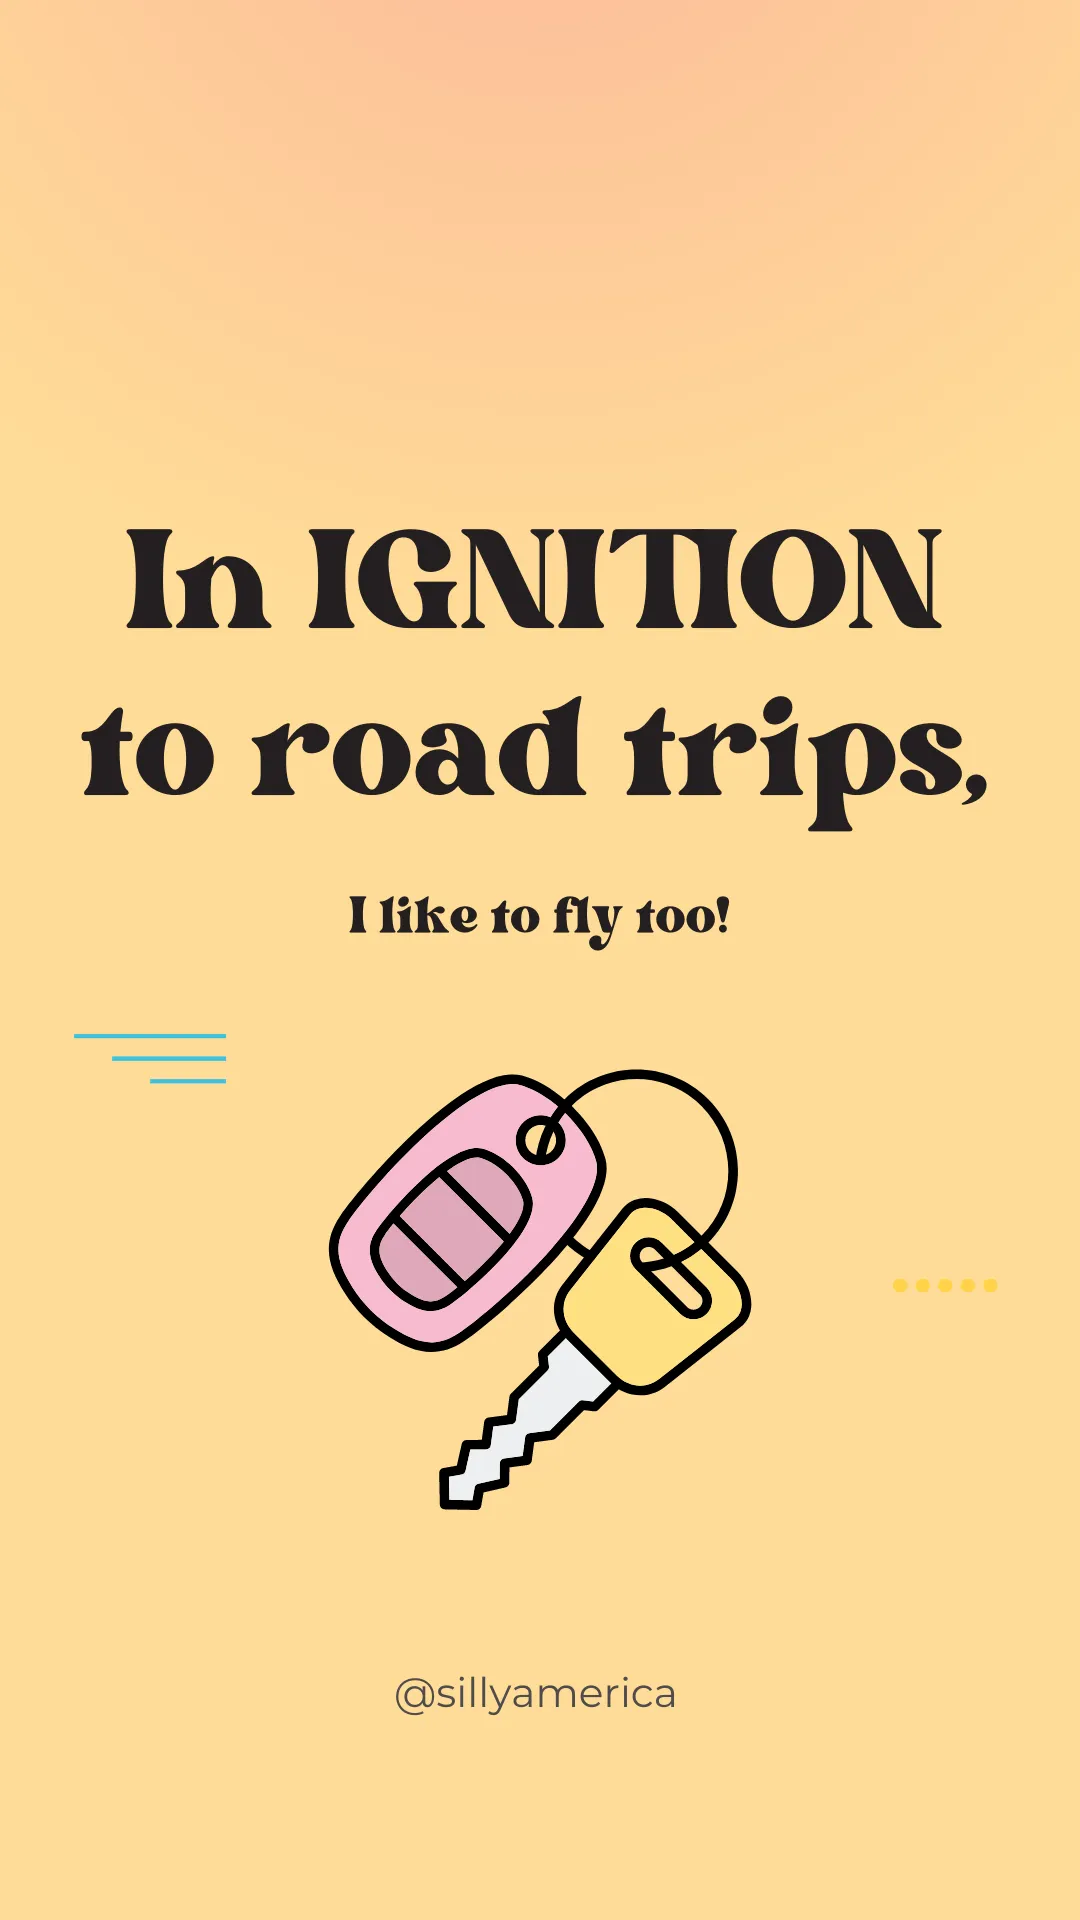 In IGNITION to road trips, I like to fly too! - Road Trip Puns